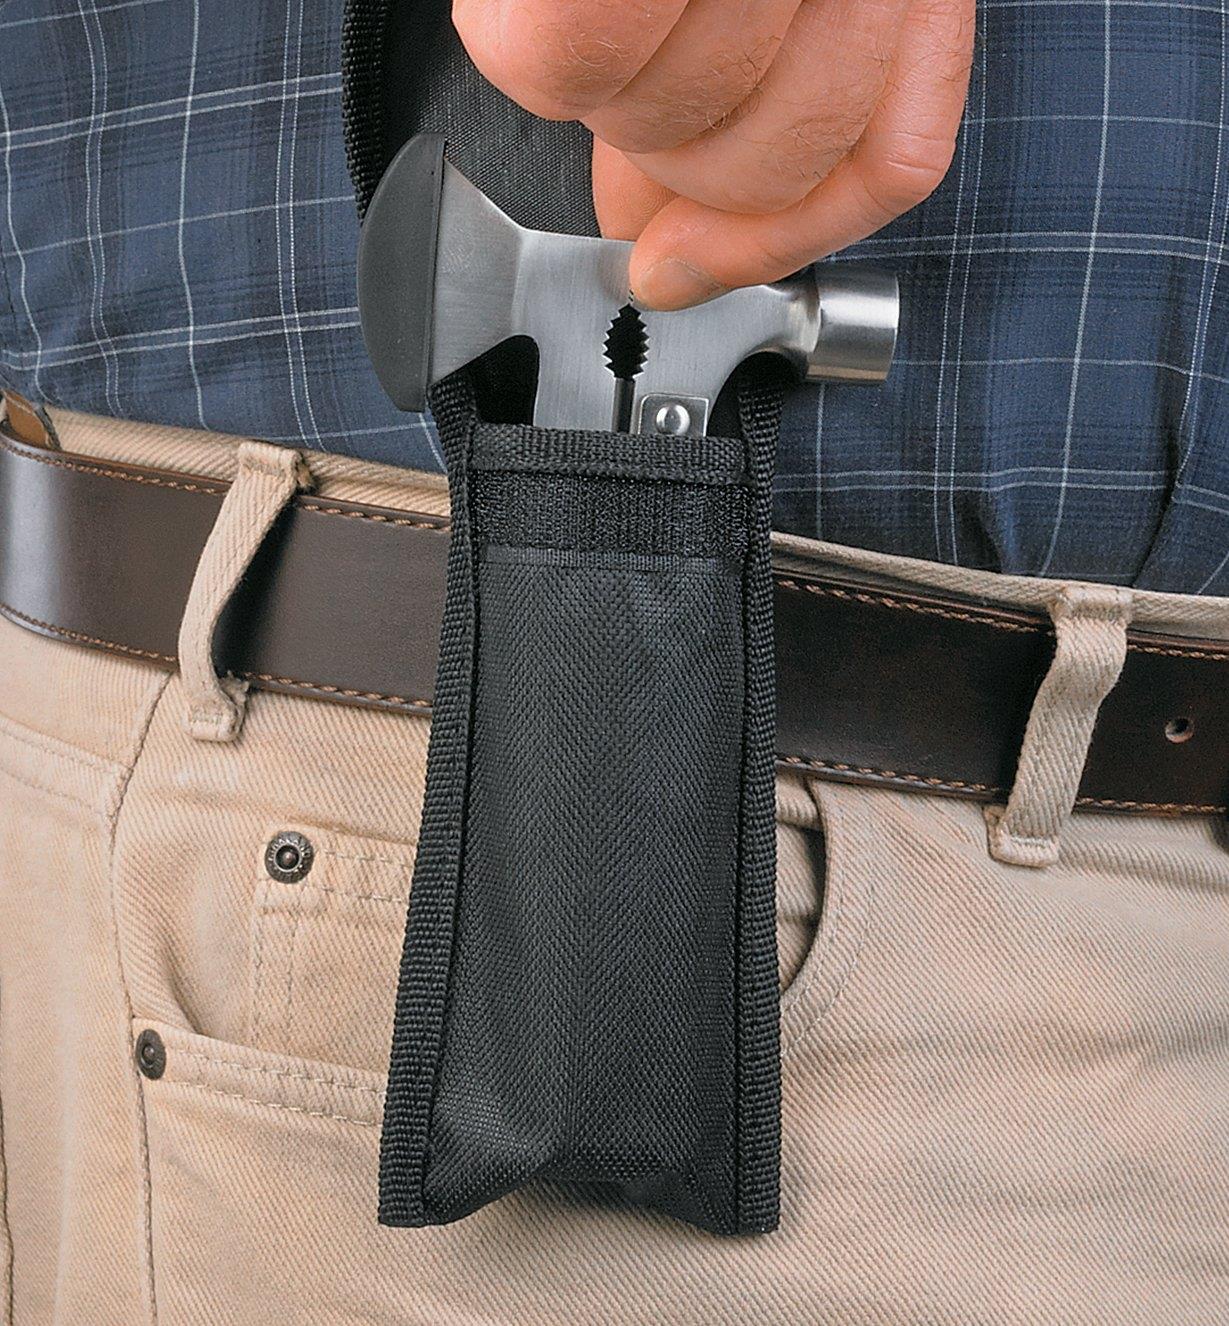 Multi-Tool carried in the holster on a belt 